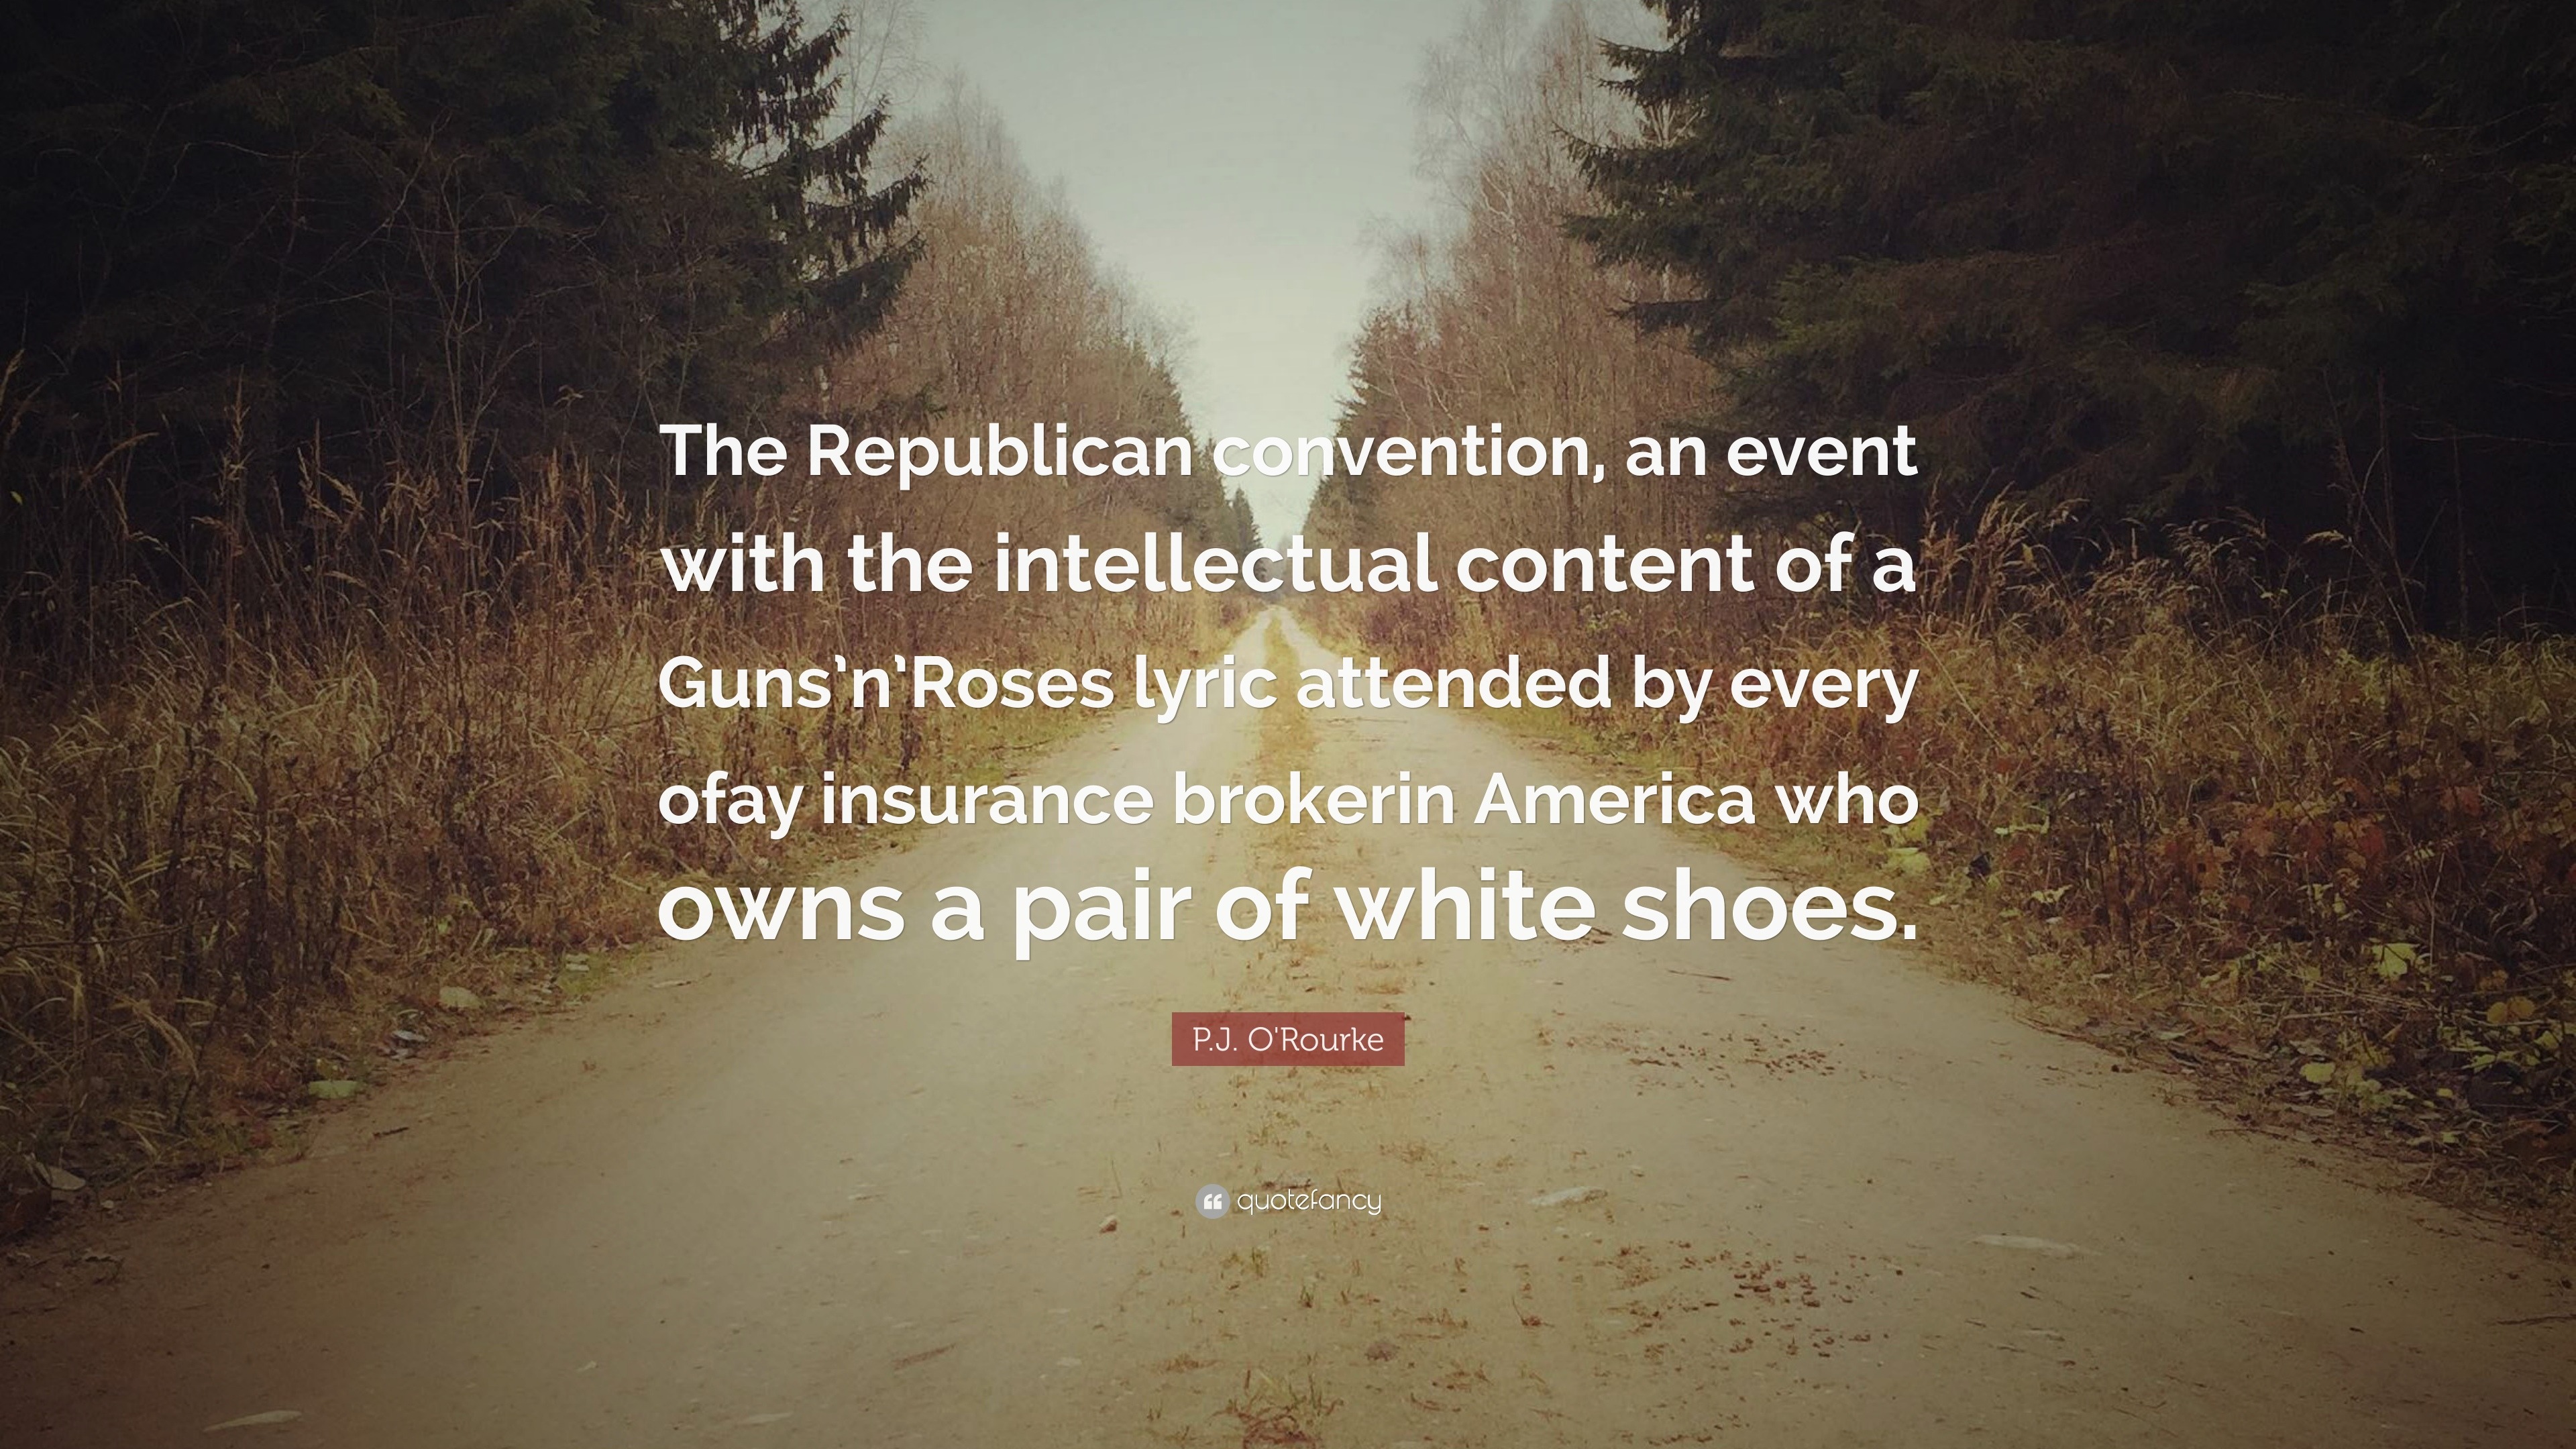 P.j. O'rourke Quote: “The Republican Convention, An Event With The Intellectual Content Of A Guns'n'roses Lyric Attended By Every Ofay Insuran...”